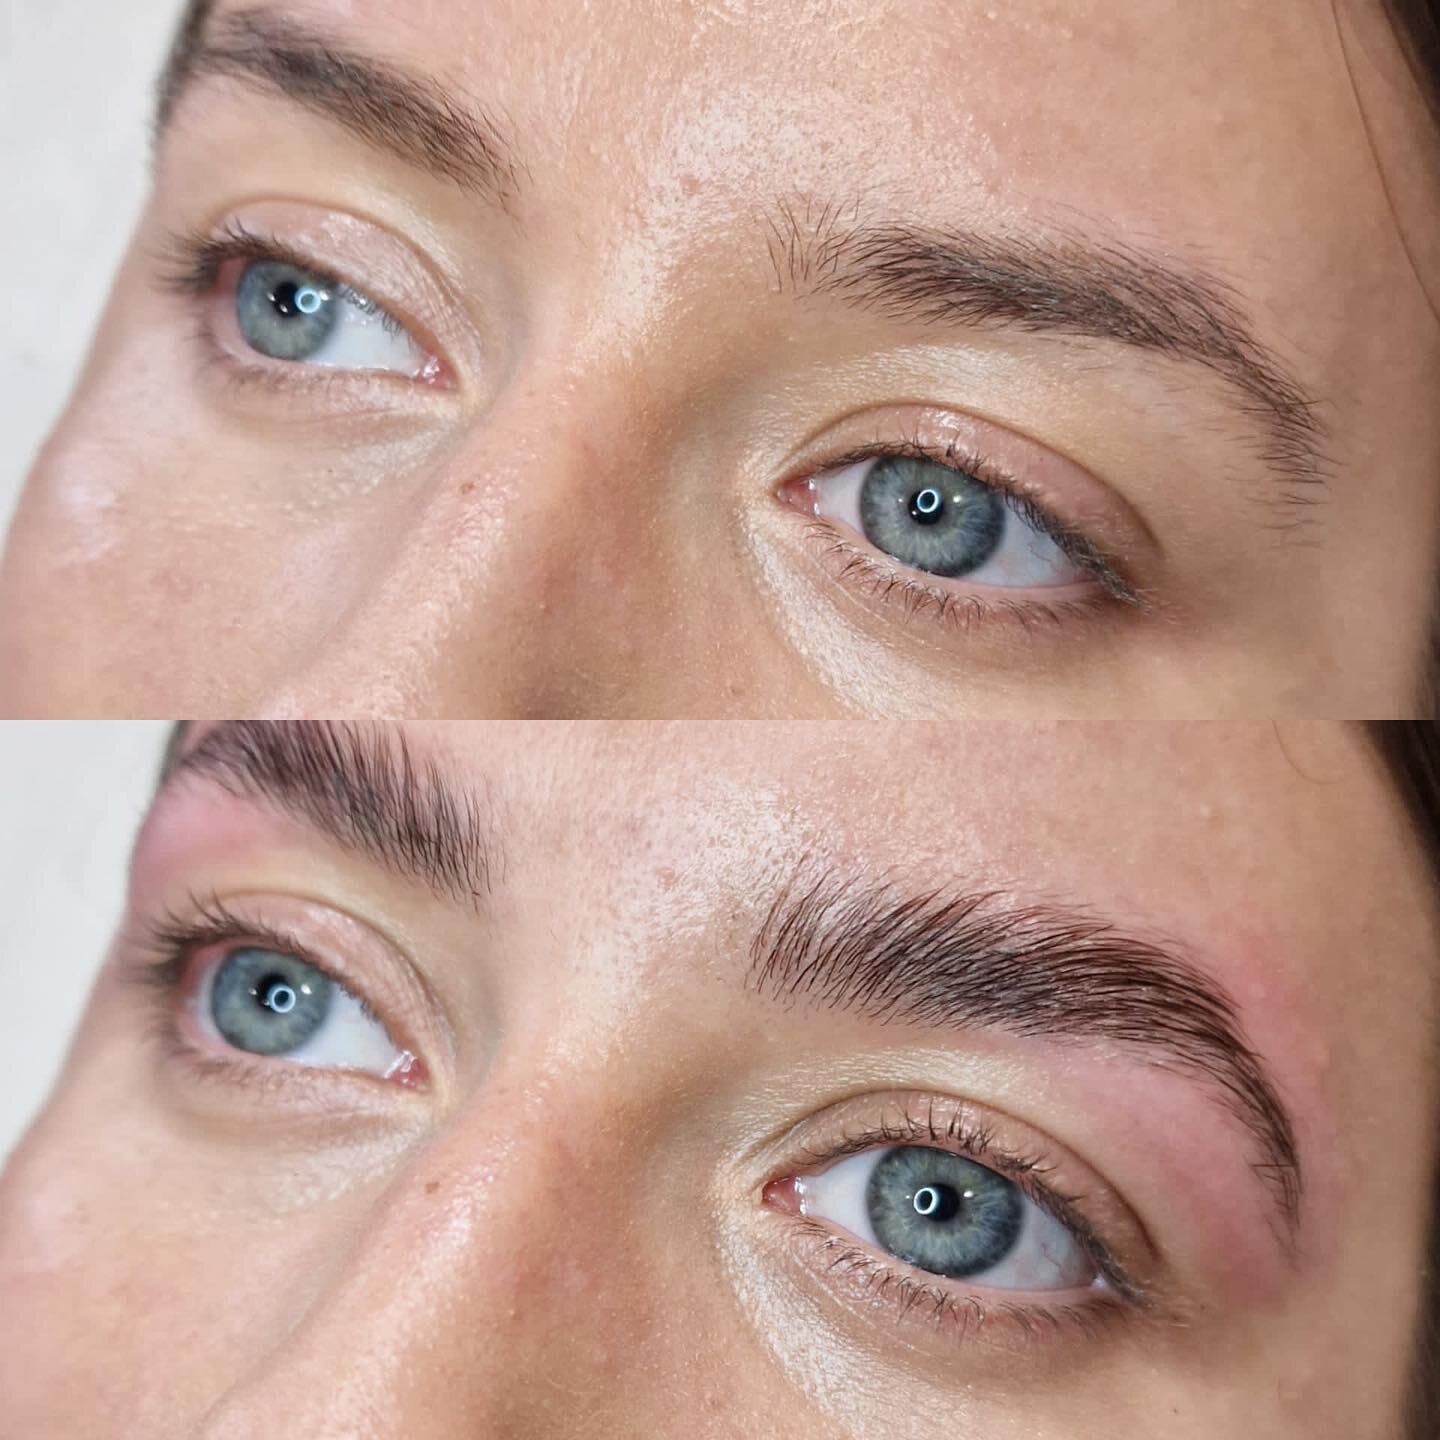 Brow Sculpt by Zoey&hellip;

&hellip;Relaxing and reforming the hairs to create that stylish finish everyone is after.

Treatment : &pound;45
Time : 45 minutes
Results : 6 weeks

#browsculpt #hd #brows #lamination #results #lift #reform #blueyes #bea